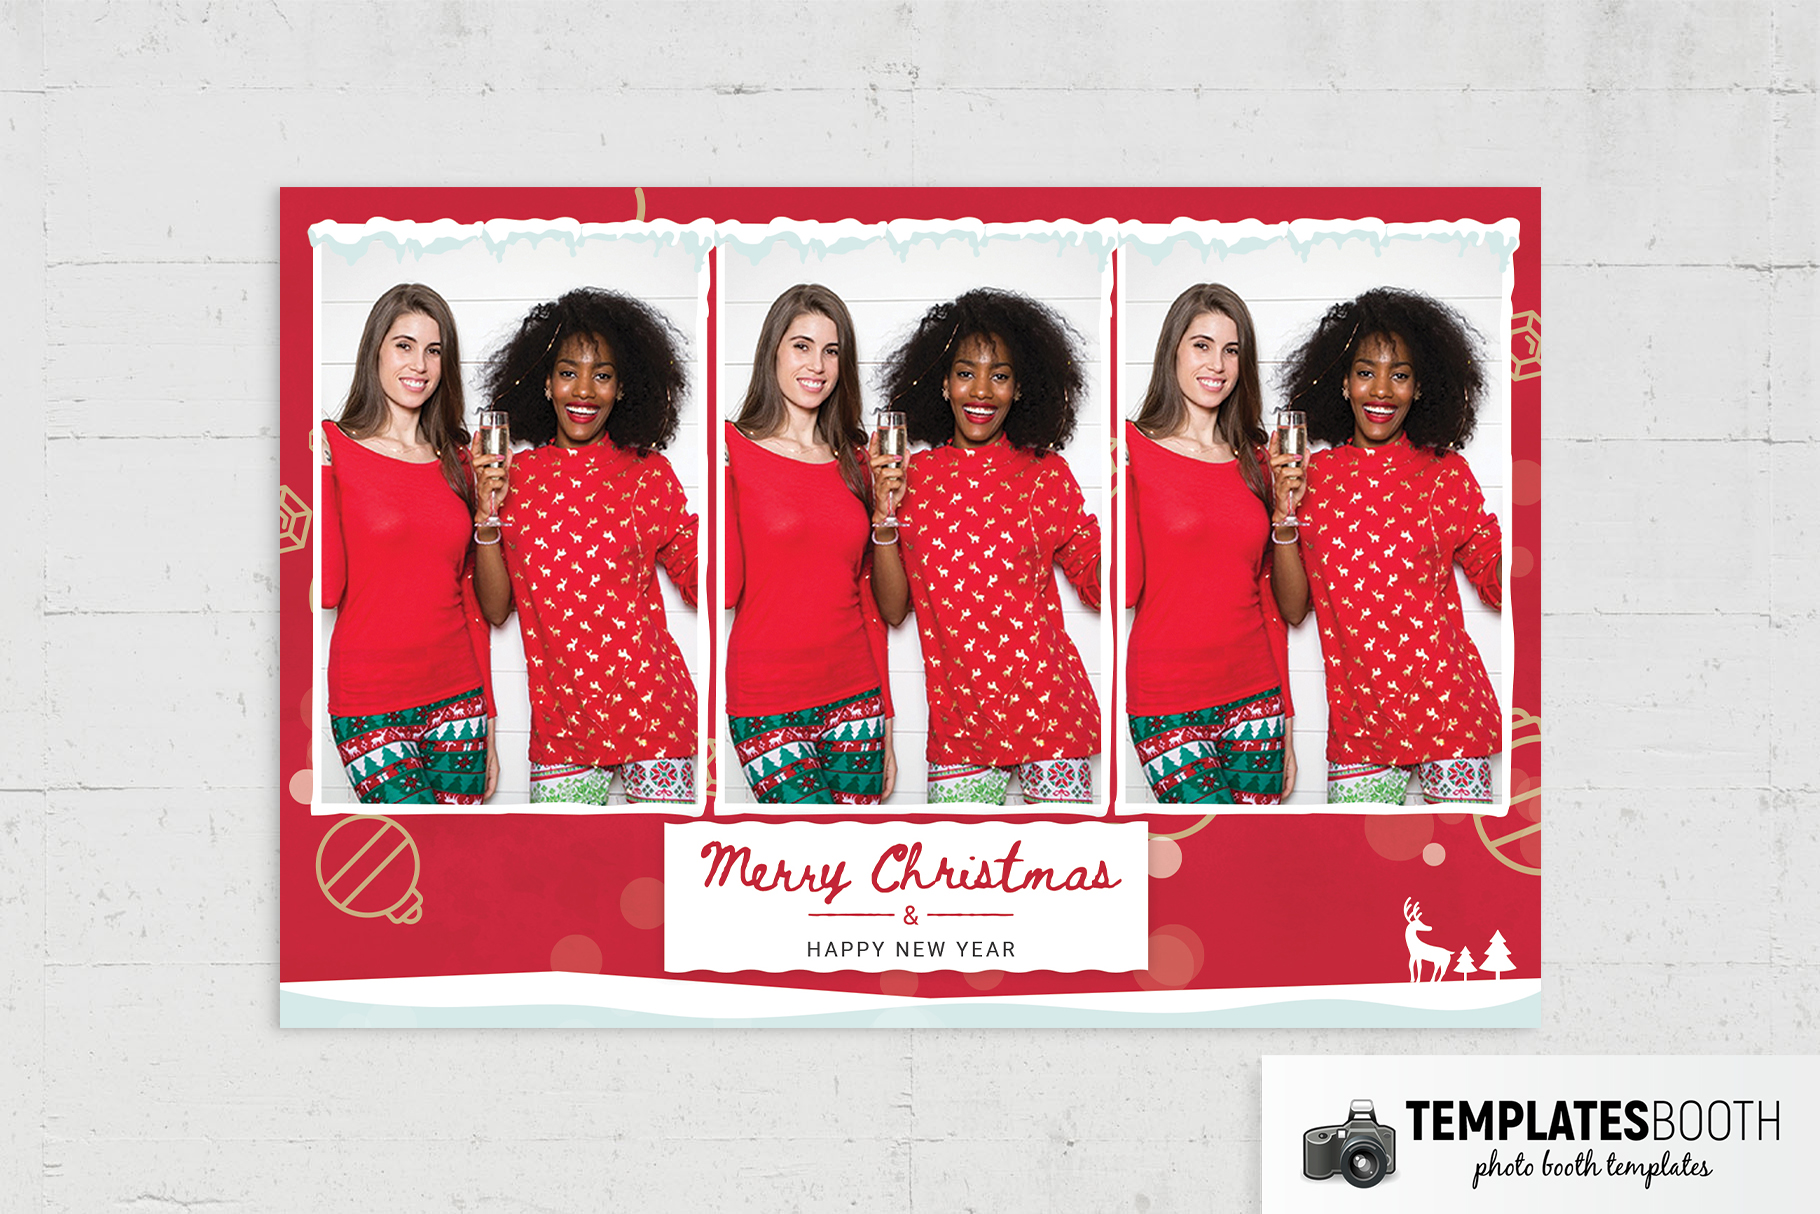 Merry Christmas Photo Booth Template